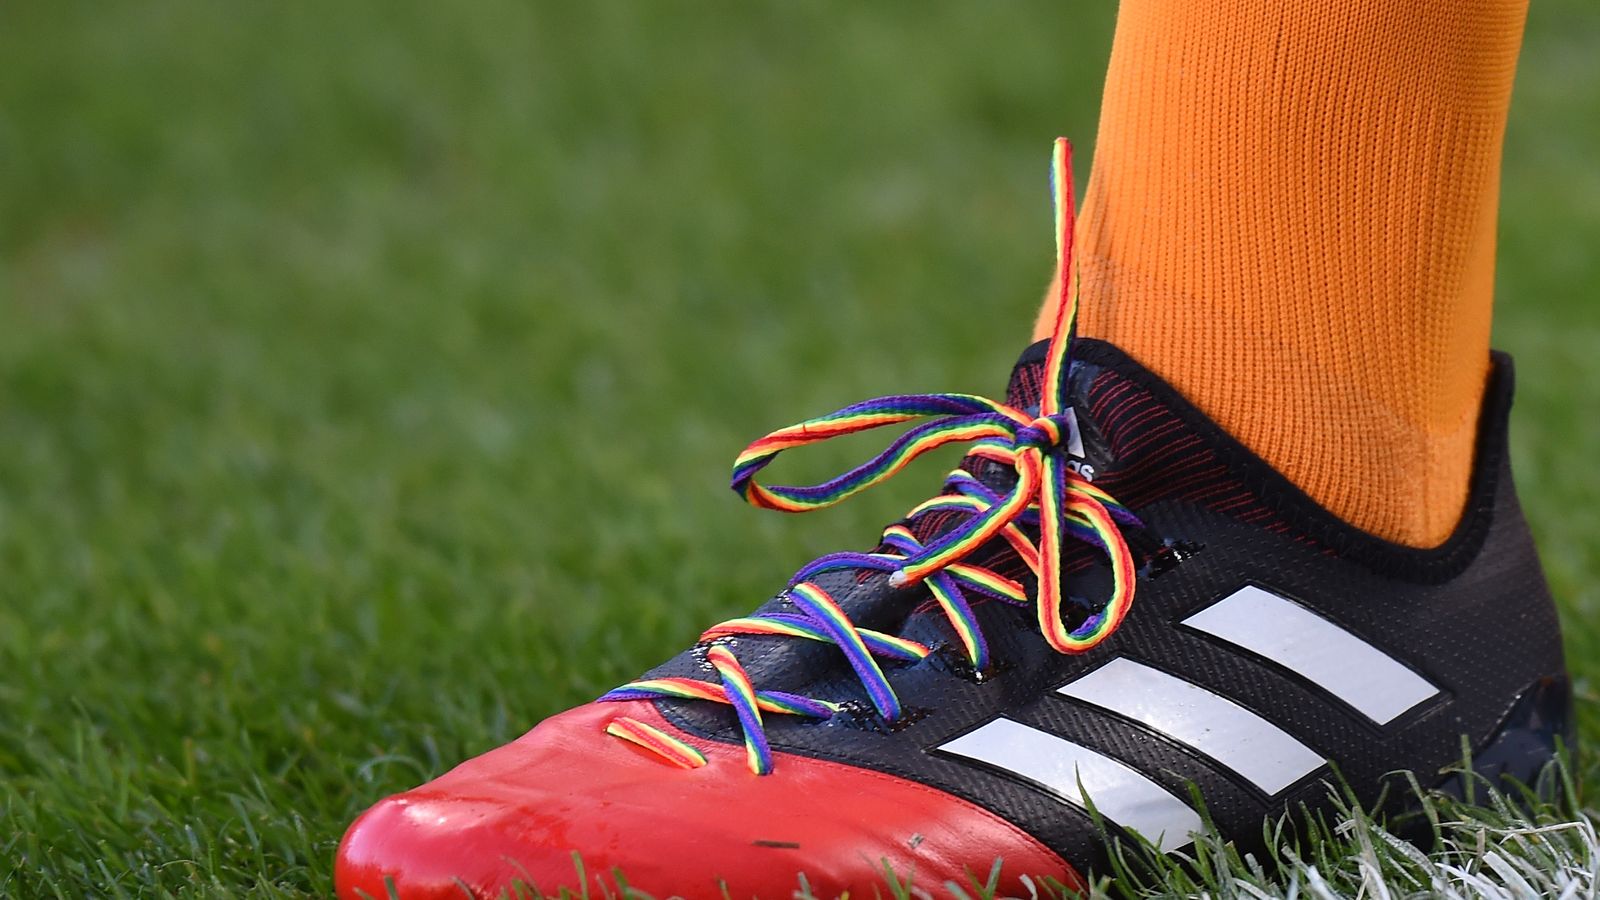 Rainbow Laces campaign set for unprecedented support later this month